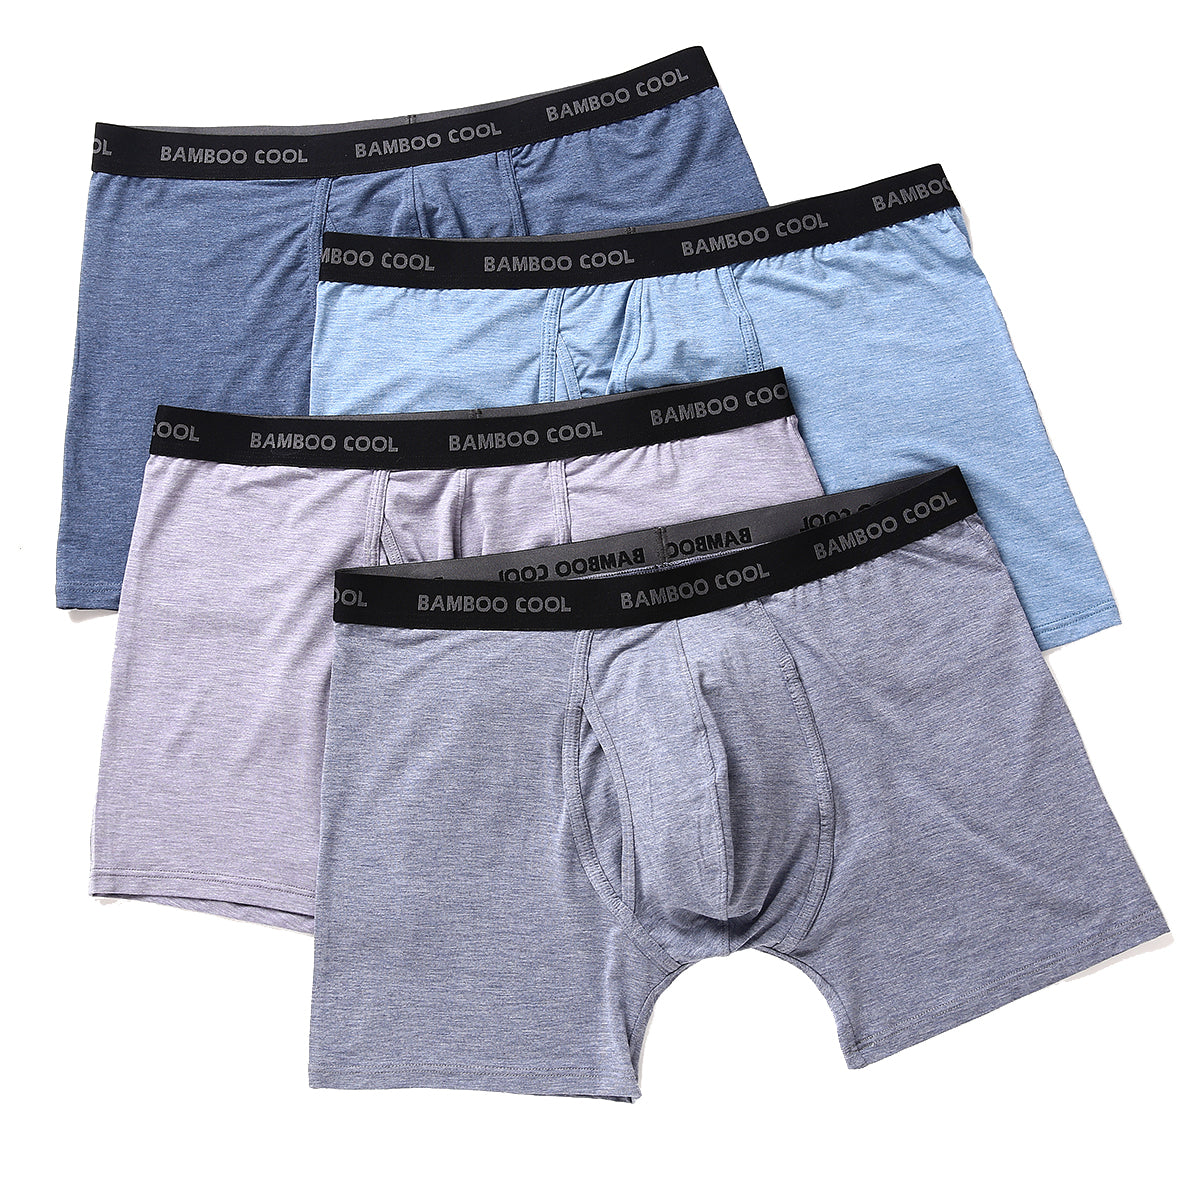 Men's Boxer Briefs,Comfortable Bamboo Viscose Underwear,Moisture Wicking  and Breathable,4 Pack,M-XXL